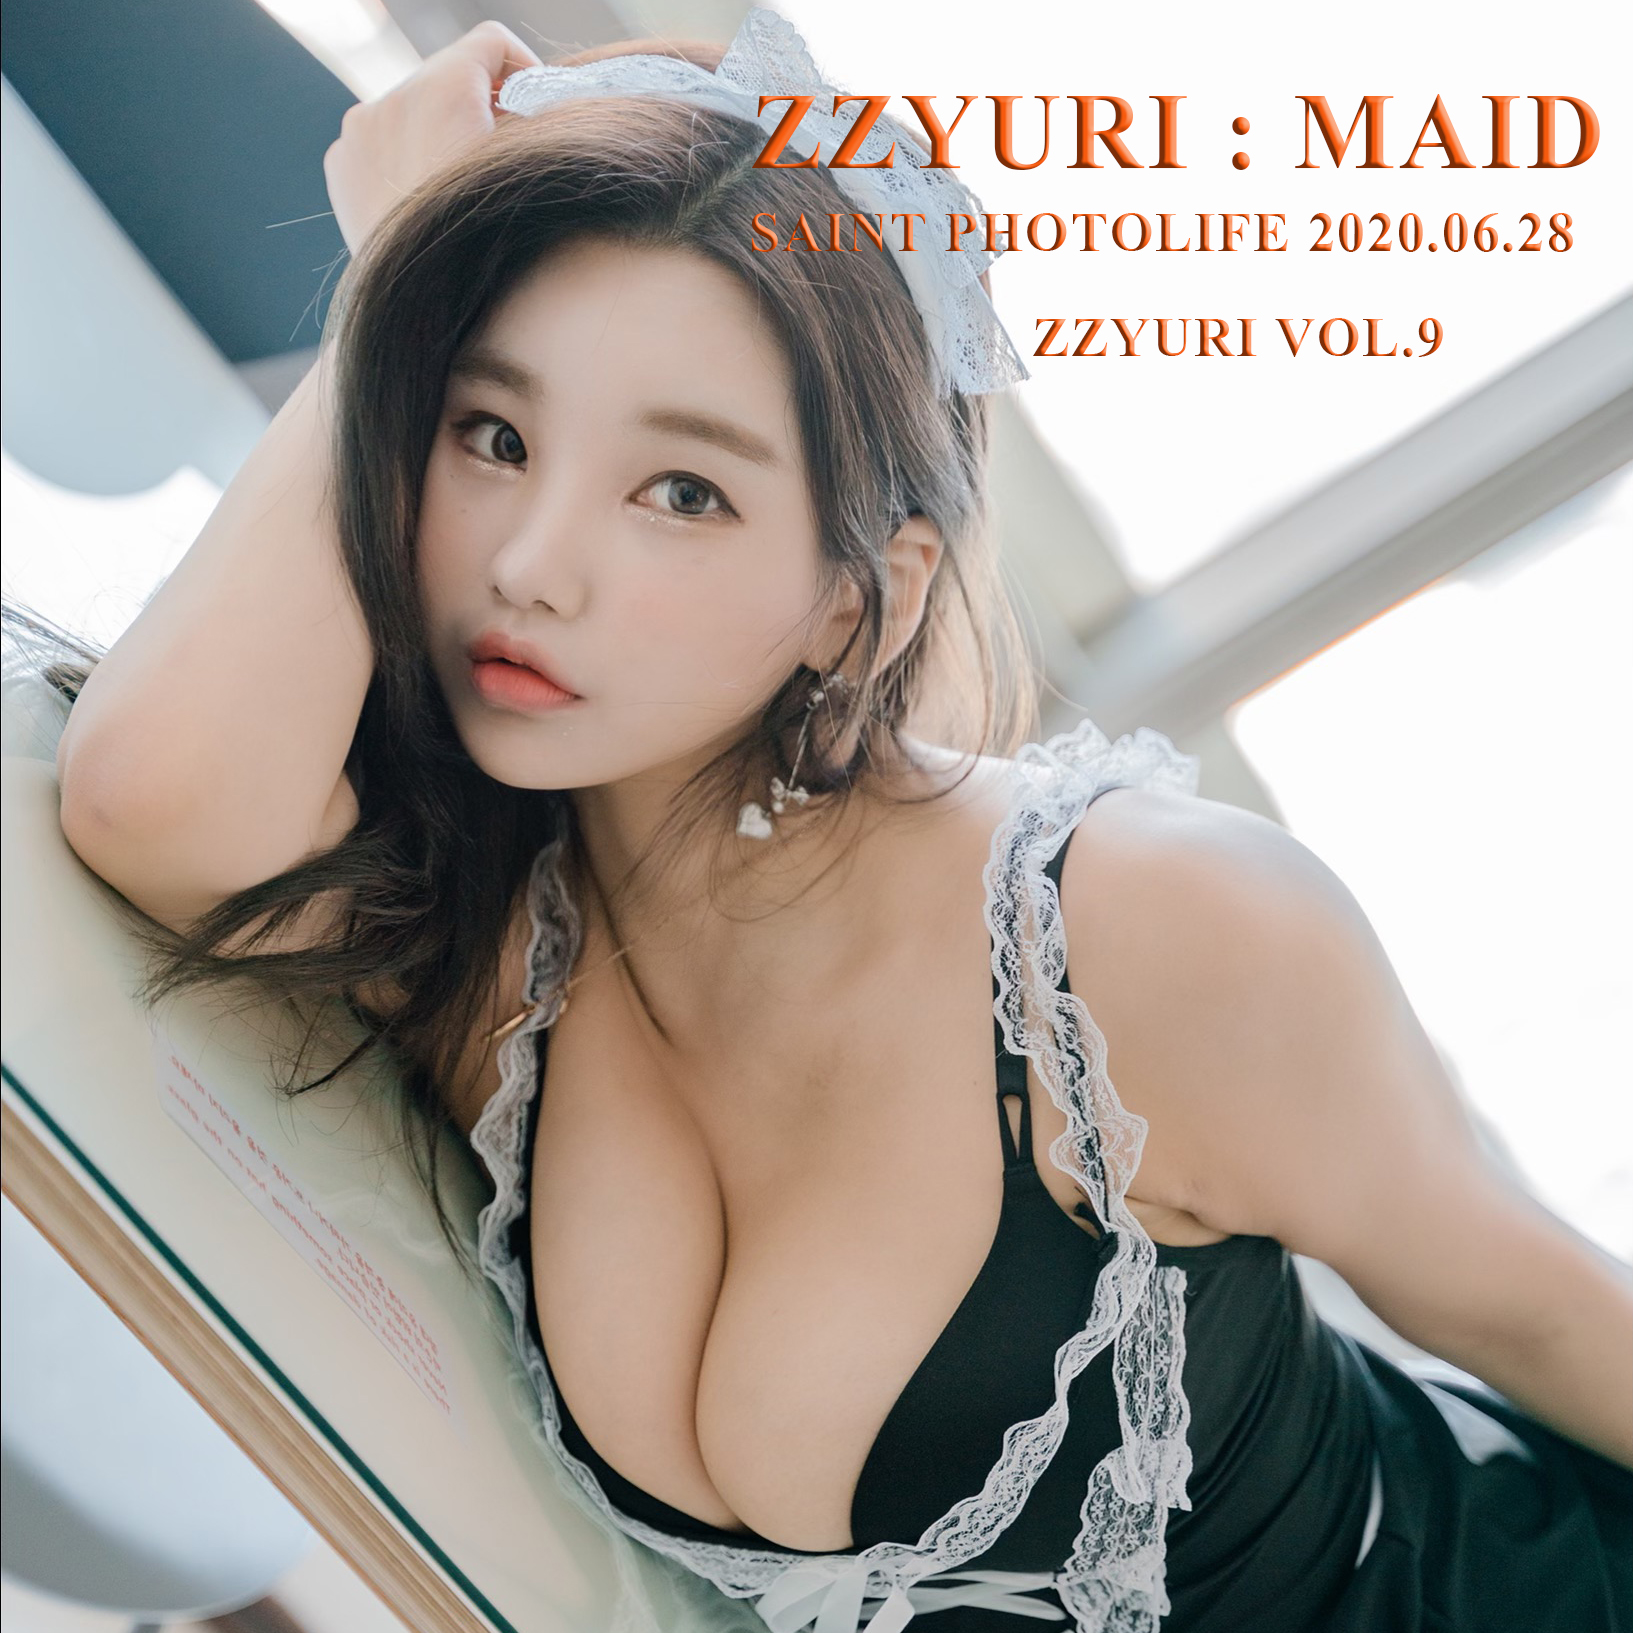 This is the sample picture from Zzyuri｜쮸리 - SAINT Photolife - Vol.1 Maid post. Click here to see image full size.